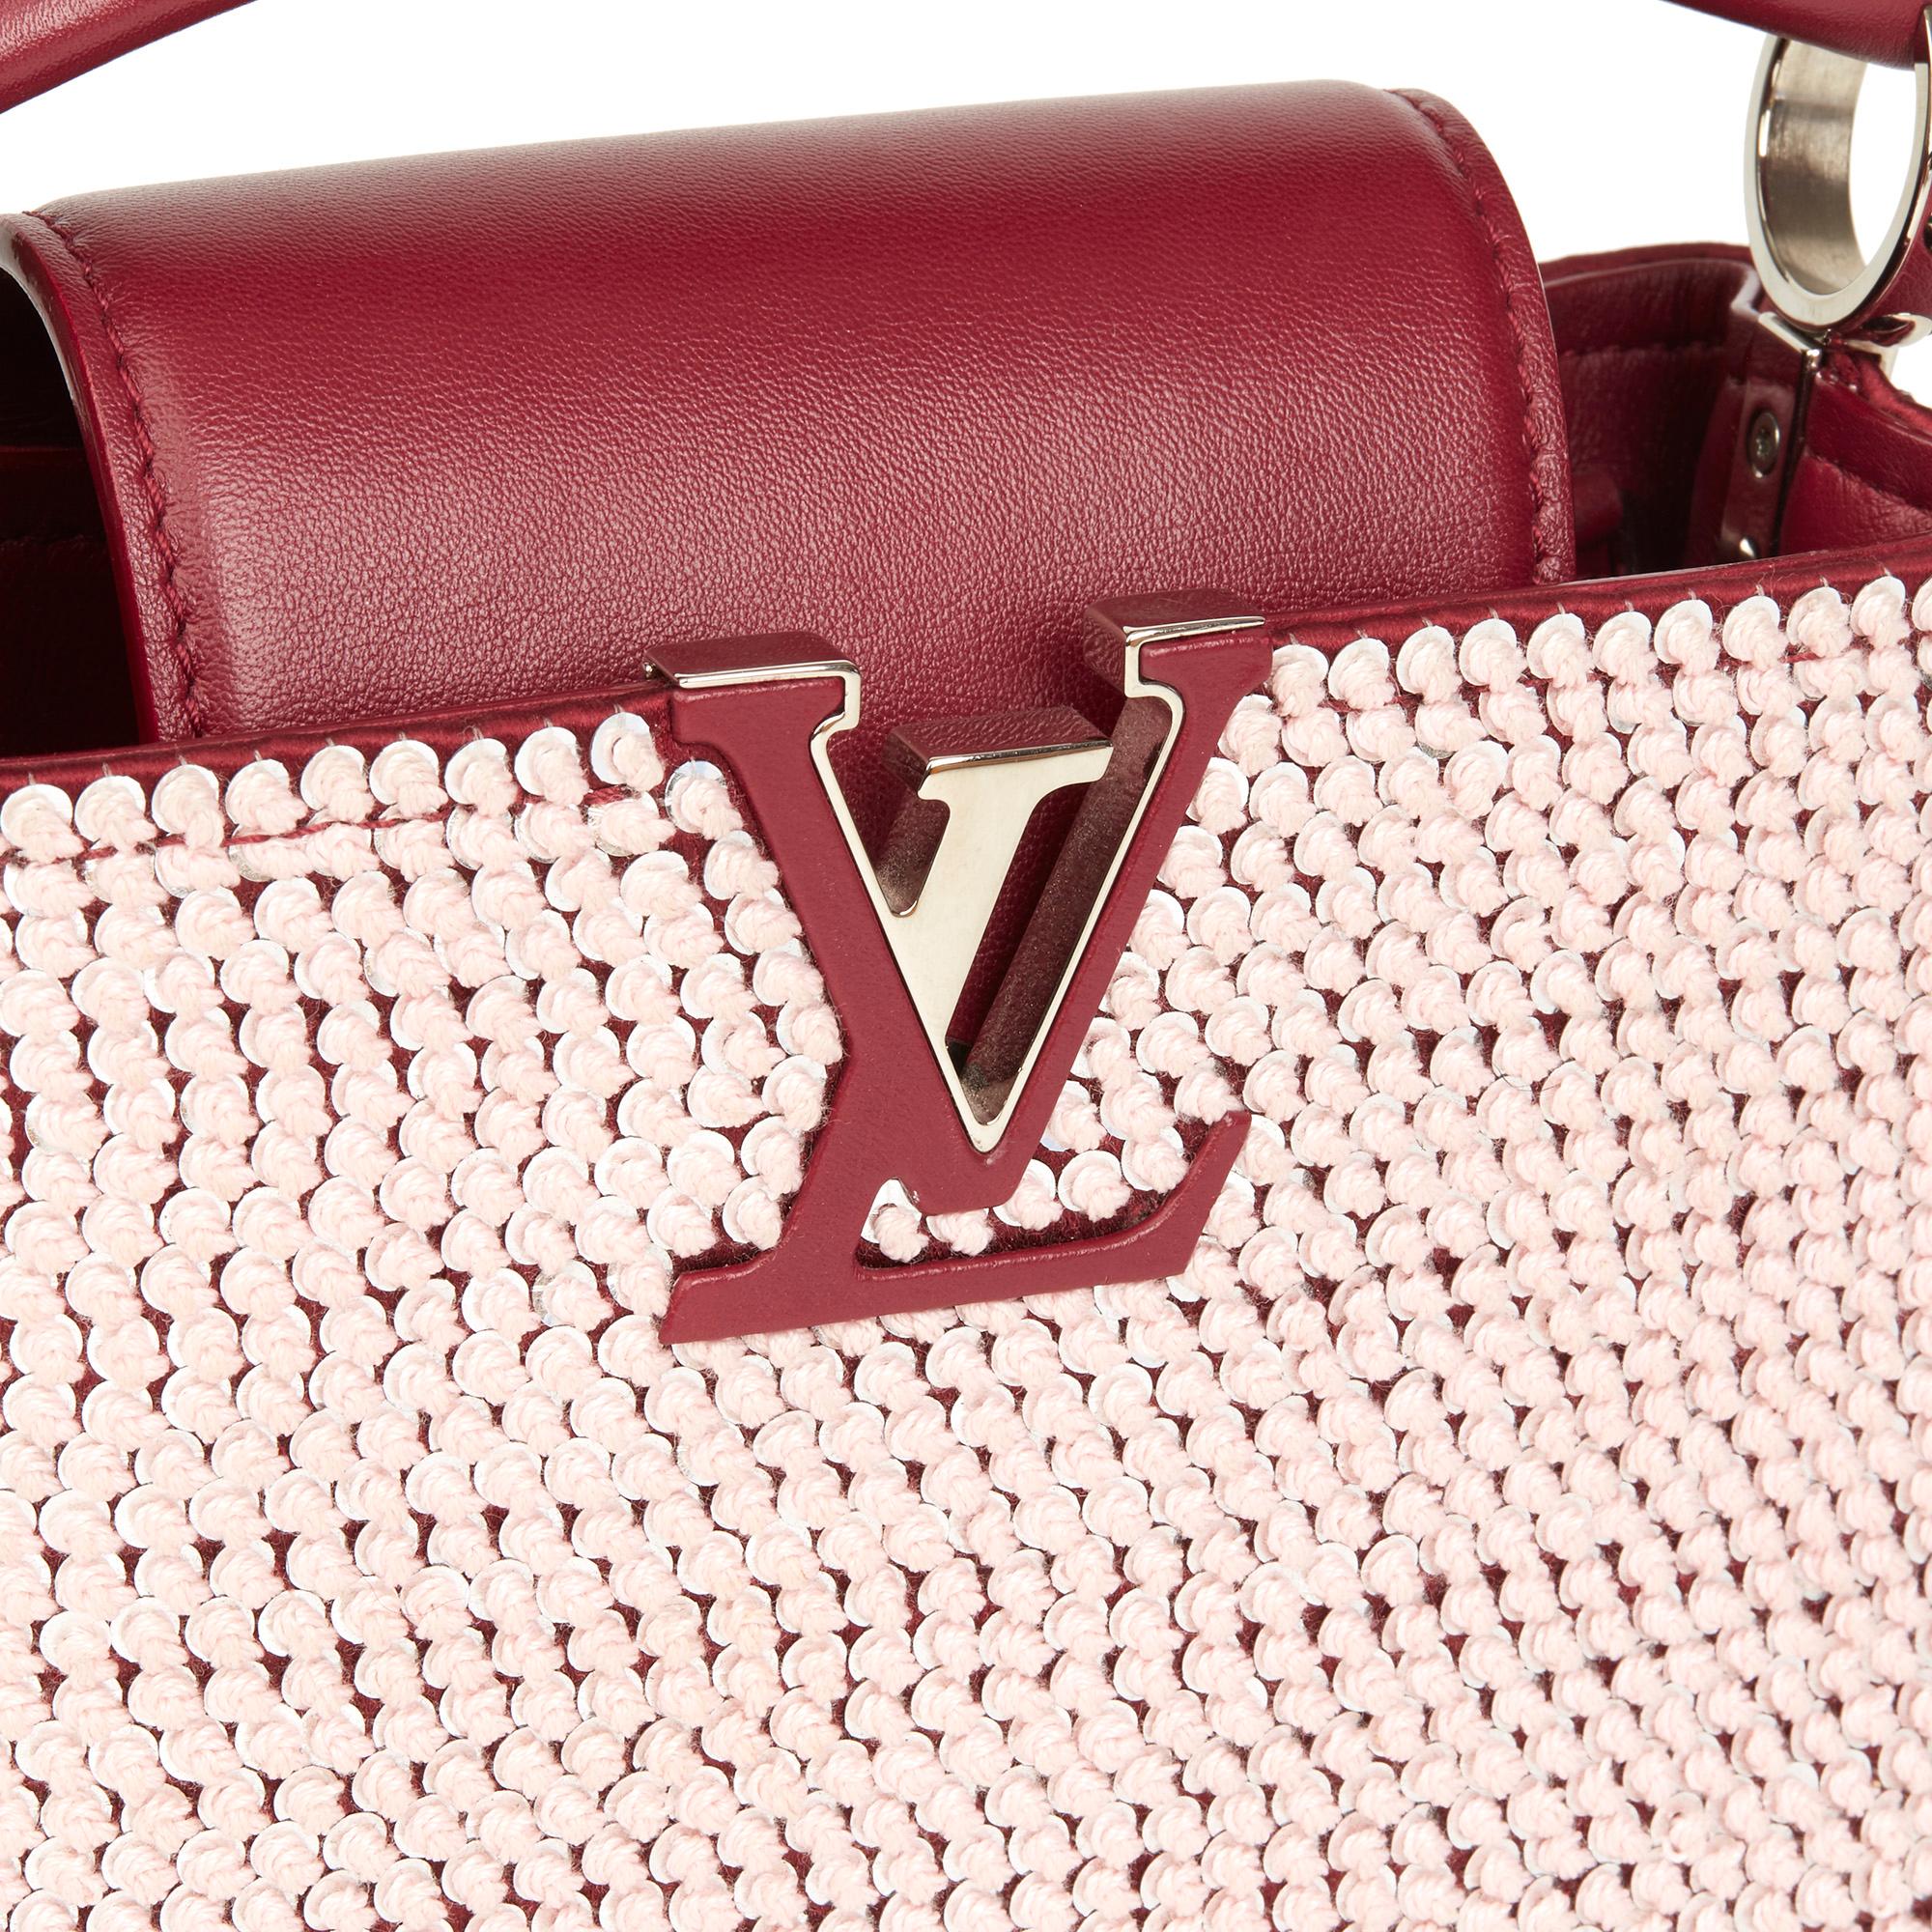 Women's 2016 Louis Vuitton Burgundy Sequin Embellished Smooth Calfskin Leather Capucines